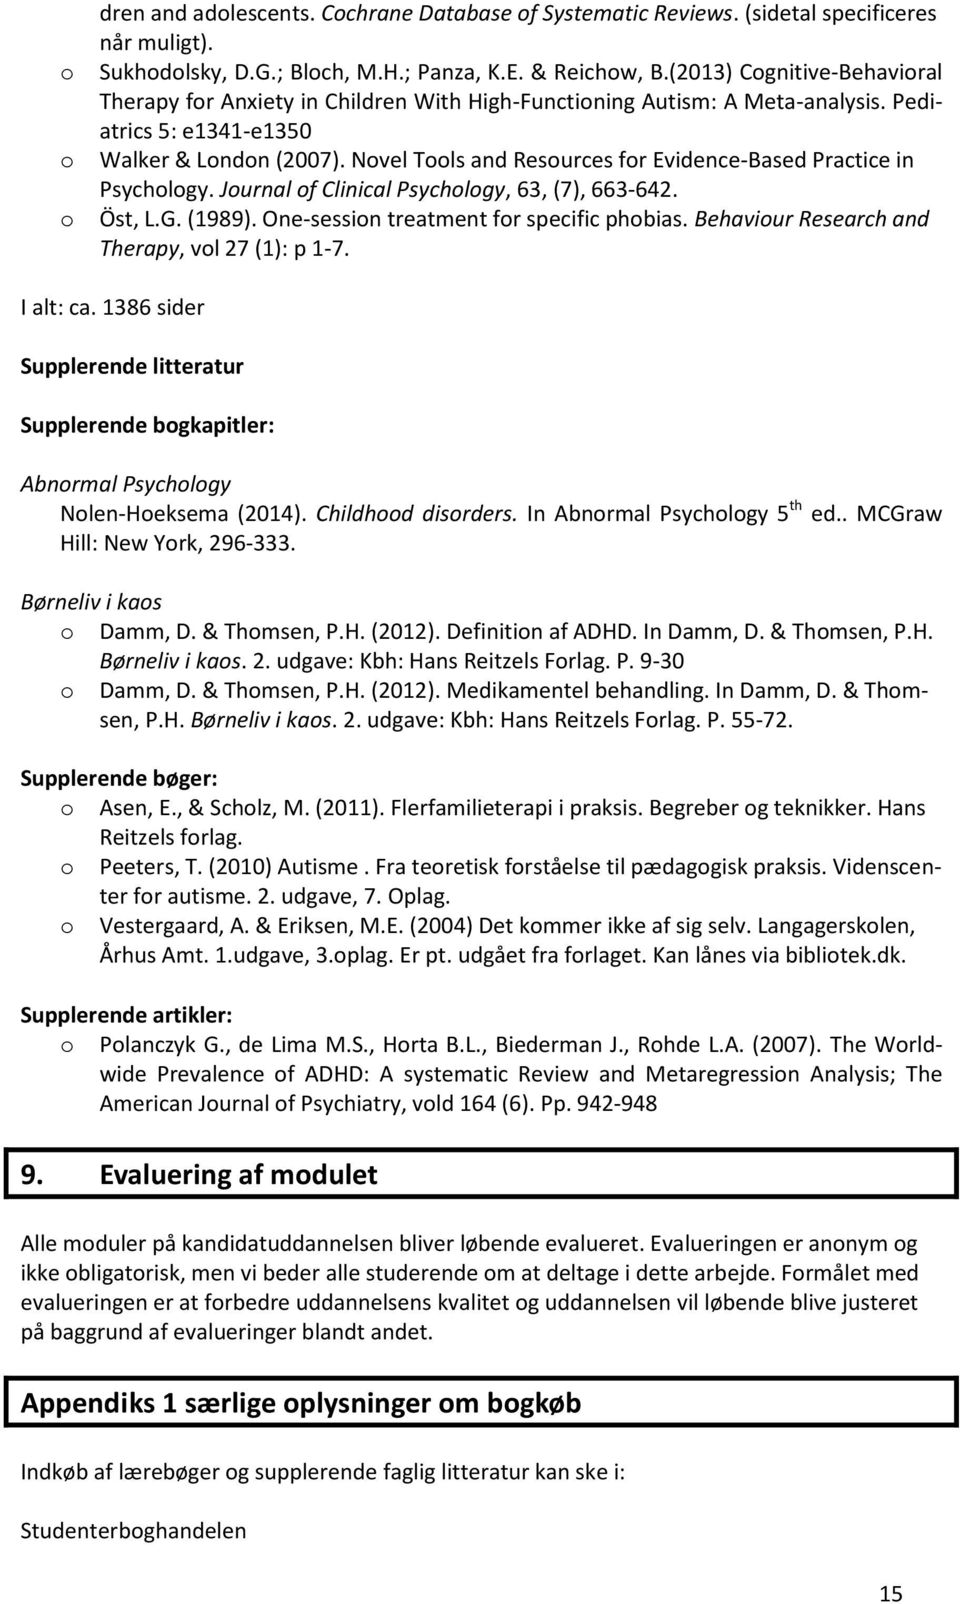 Novel Tools and Resources for Evidence-Based Practice in Psychology. Journal of Clinical Psychology, 63, (7), 663-642. Öst, L.G. (1989). One-session treatment for specific phobias.